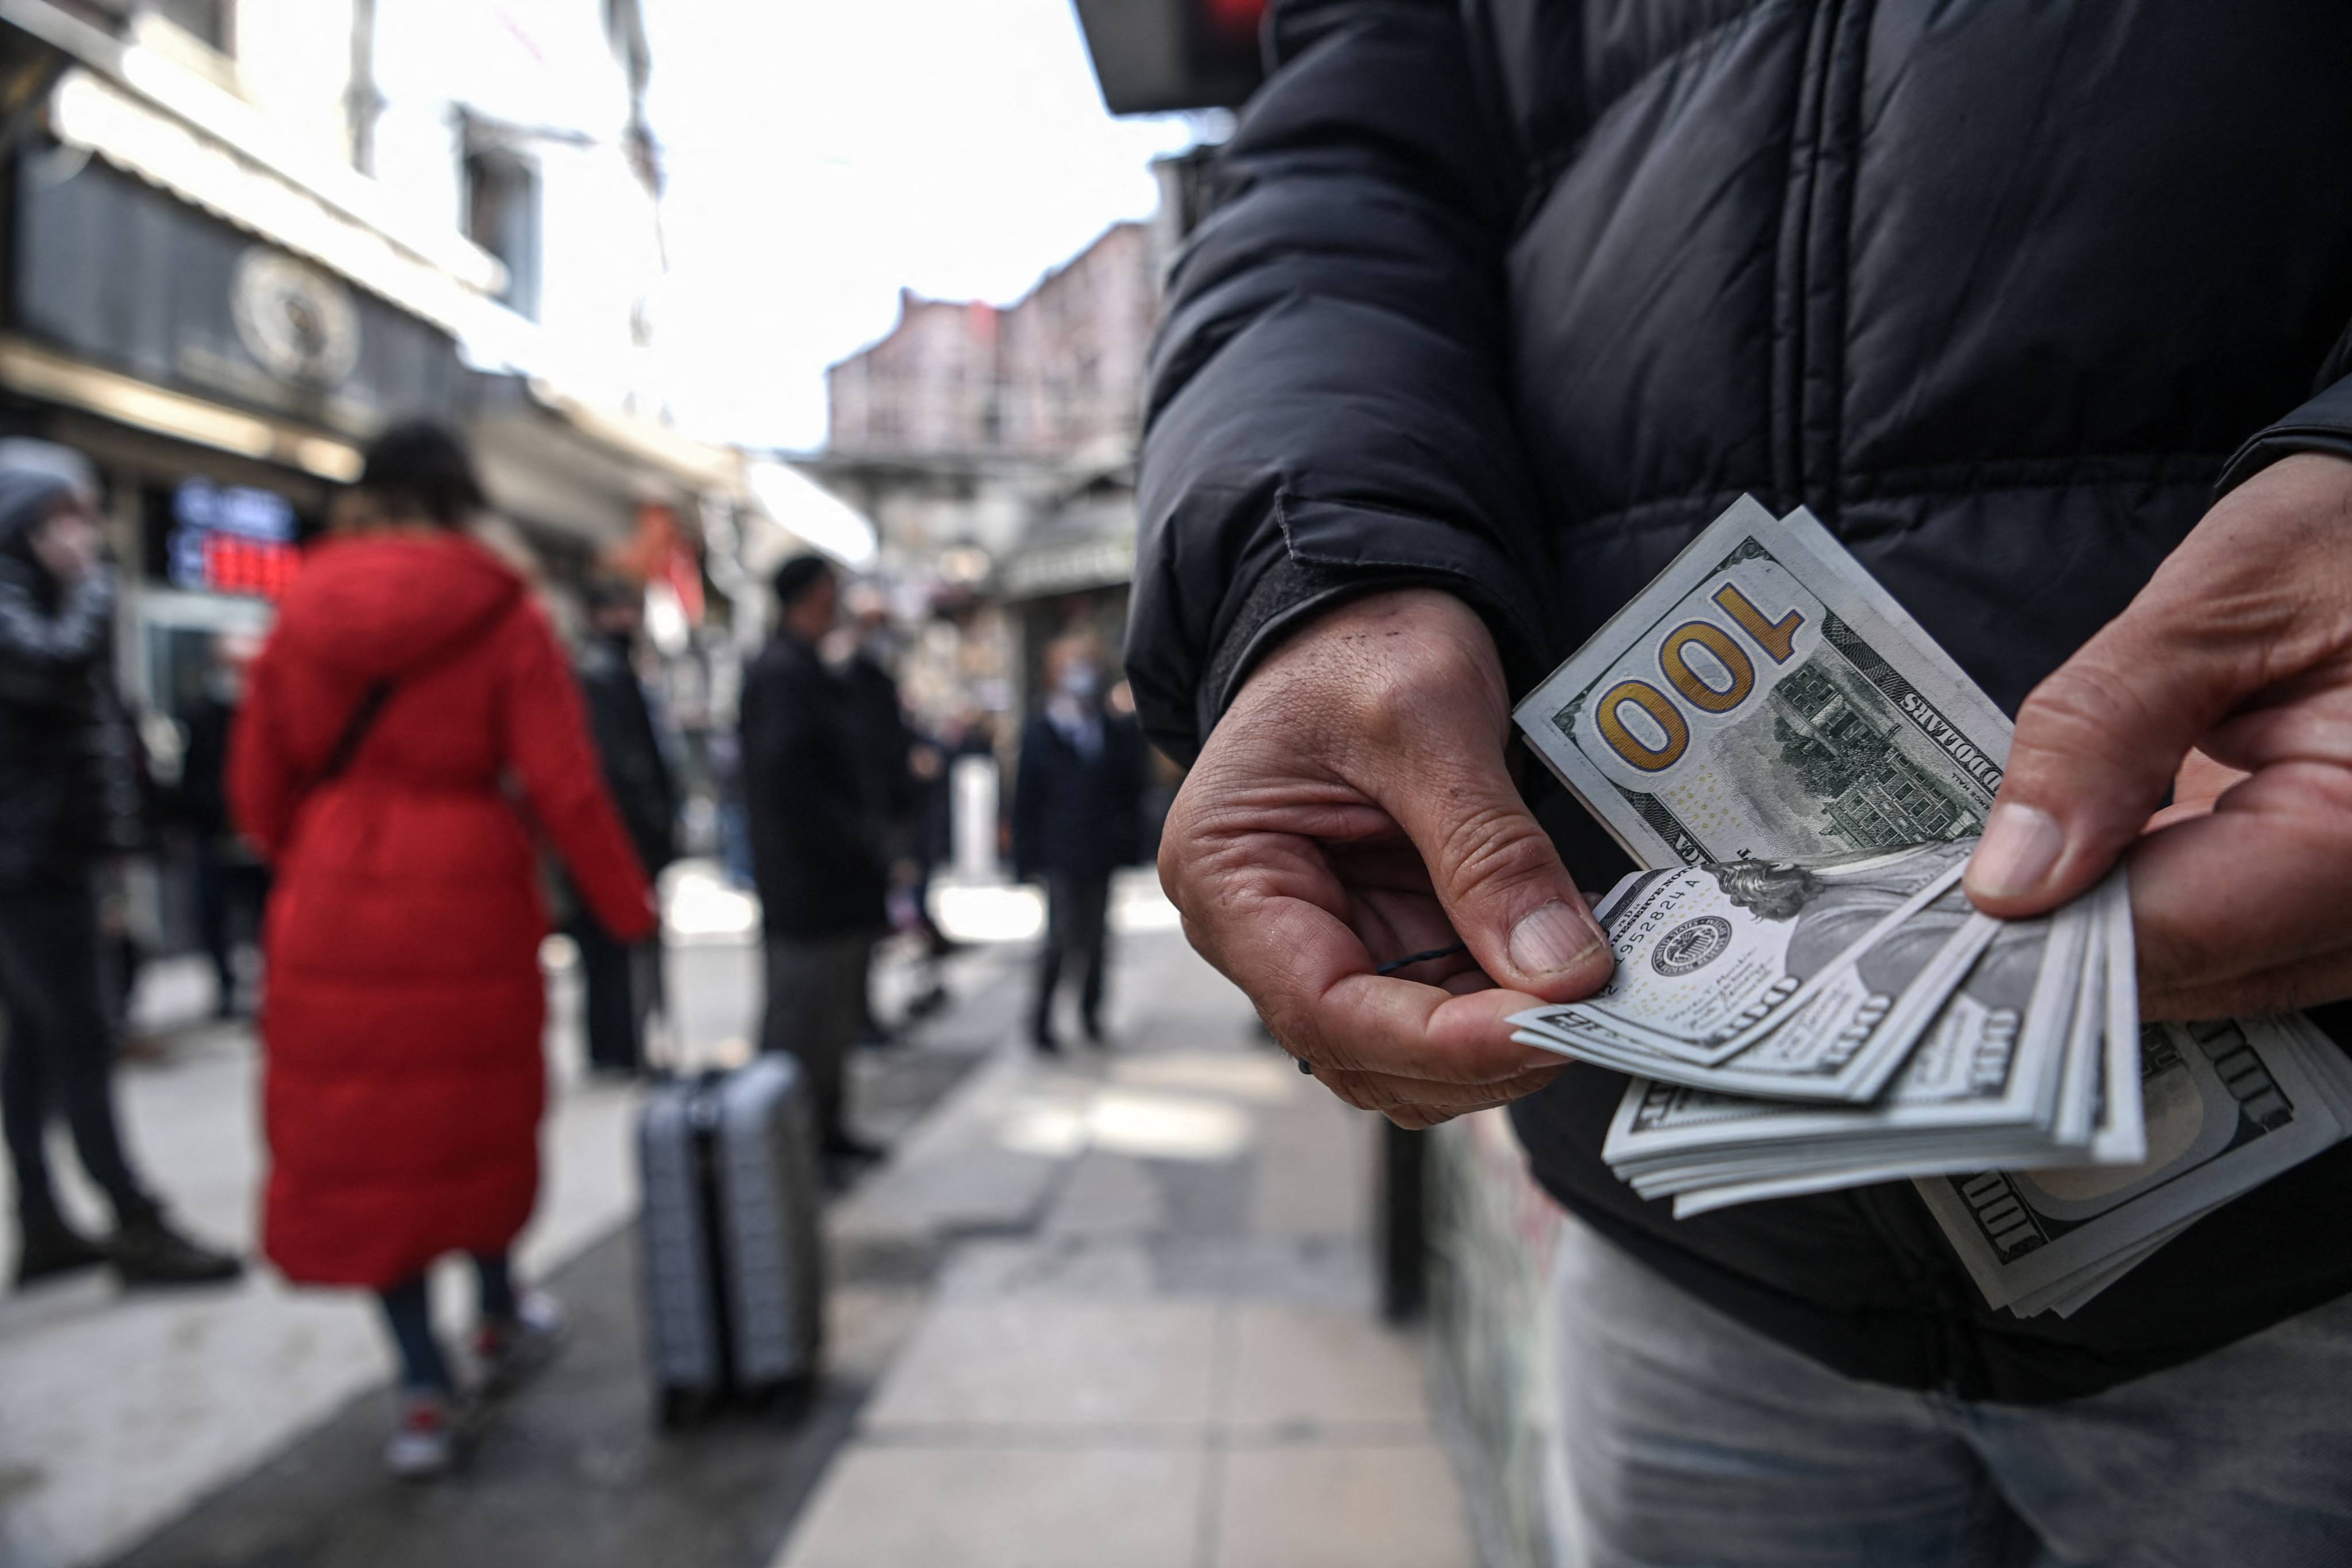 Professional investors are negative on the dollar, a survey showed. Photo: AFP